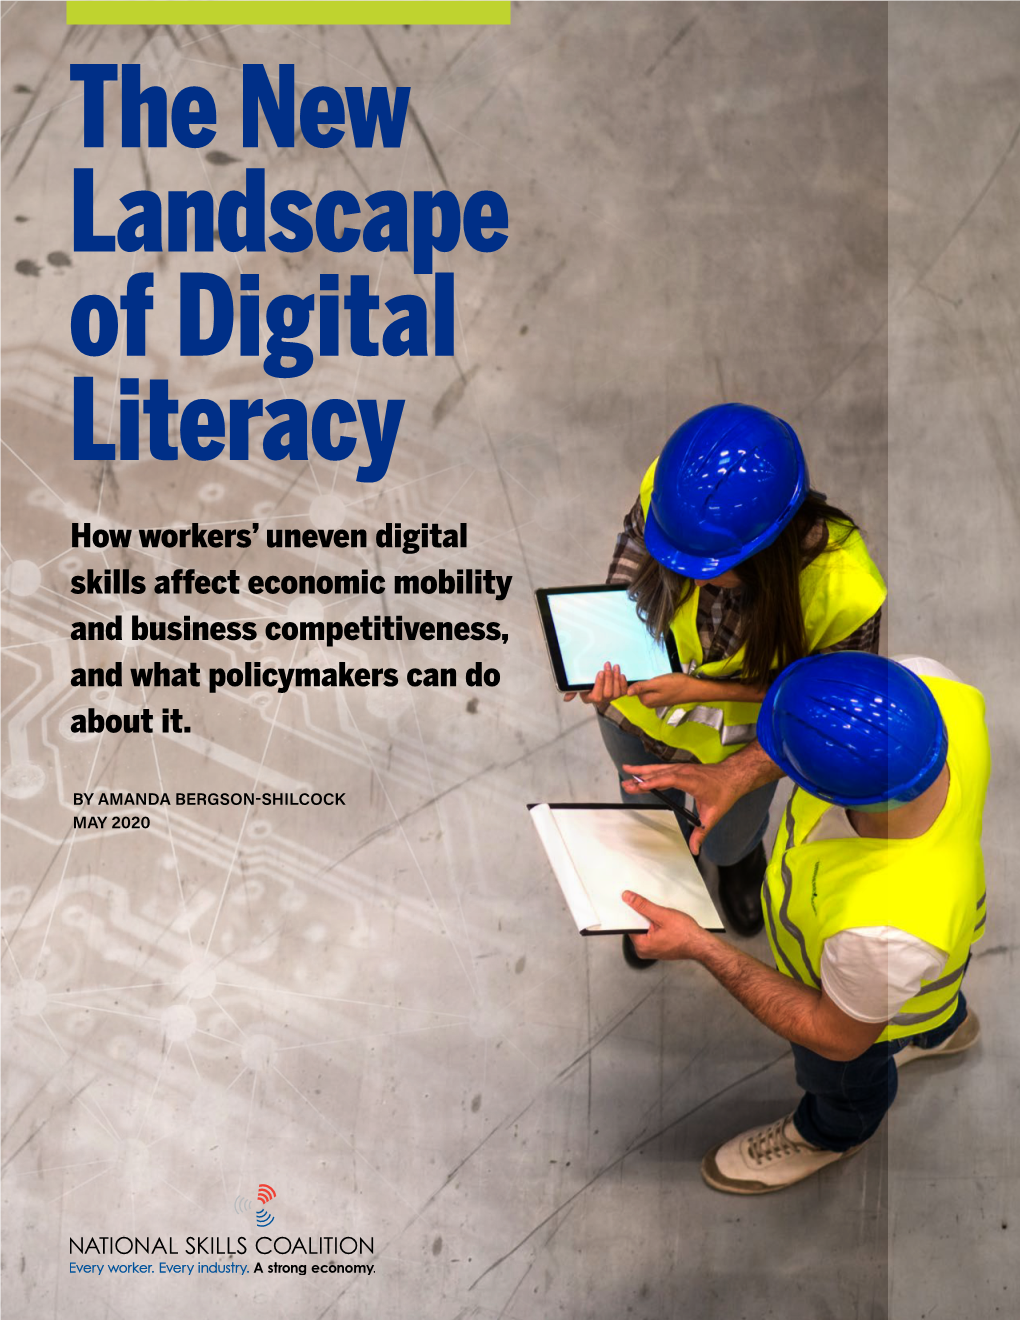 The New Landscape of Digital Literacy